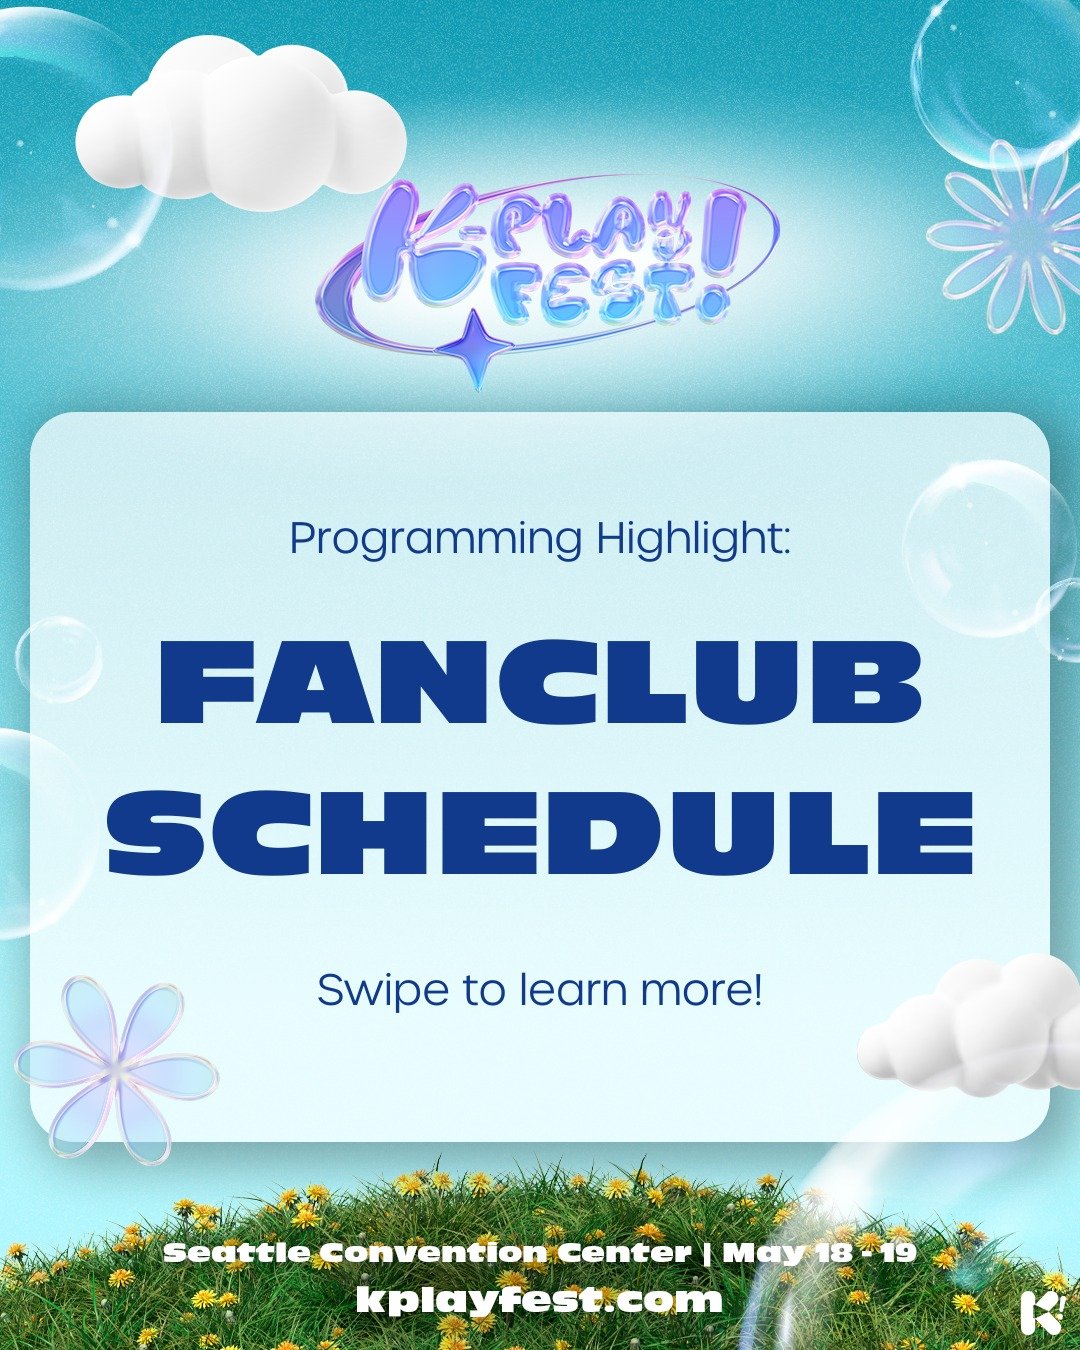 Lady, Lady, call me SUPER(FAN)! 🤩 ~ Don&rsquo;t forget to stop by🪭 our fanclub booth 🪭while you&rsquo;re at K-PLAY! FEST Seattle! 🙈Check out our fanclub schedule to meet other fans that share the same love as you! 🩵

🎟️ Grab those tickets and j